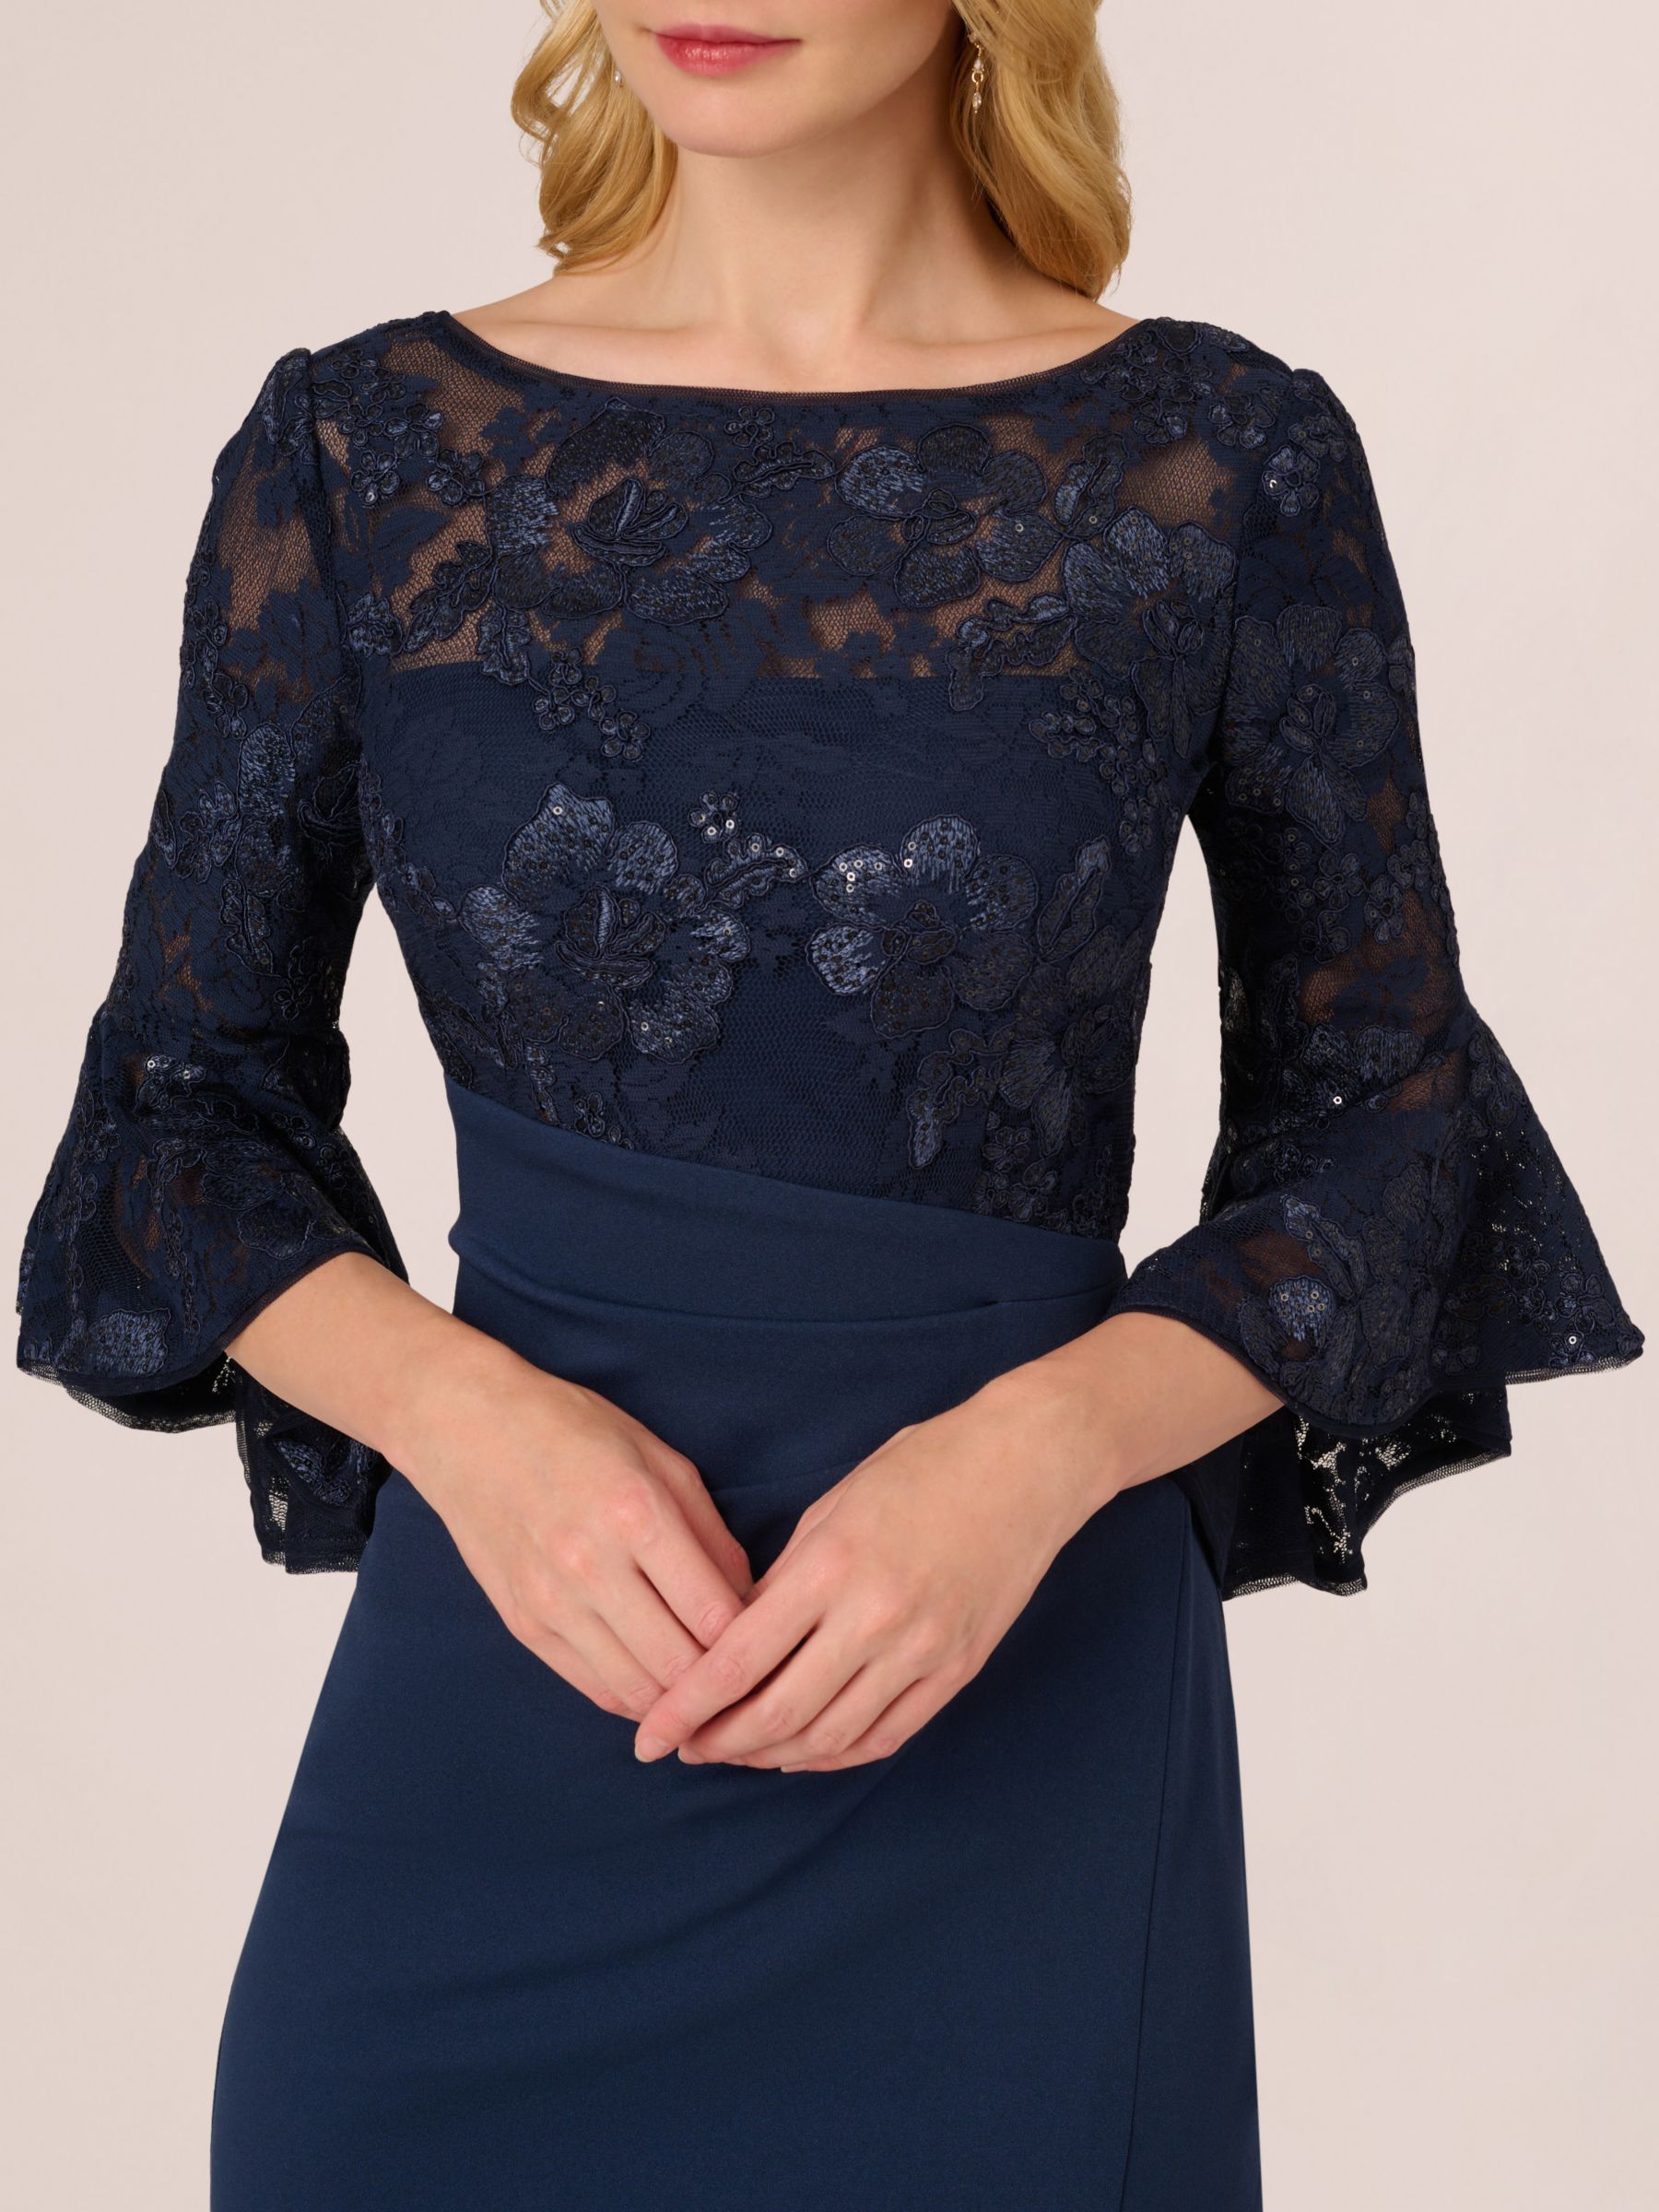 Adrianna Papell Floral Lace Combo Sheath Dress, Navy